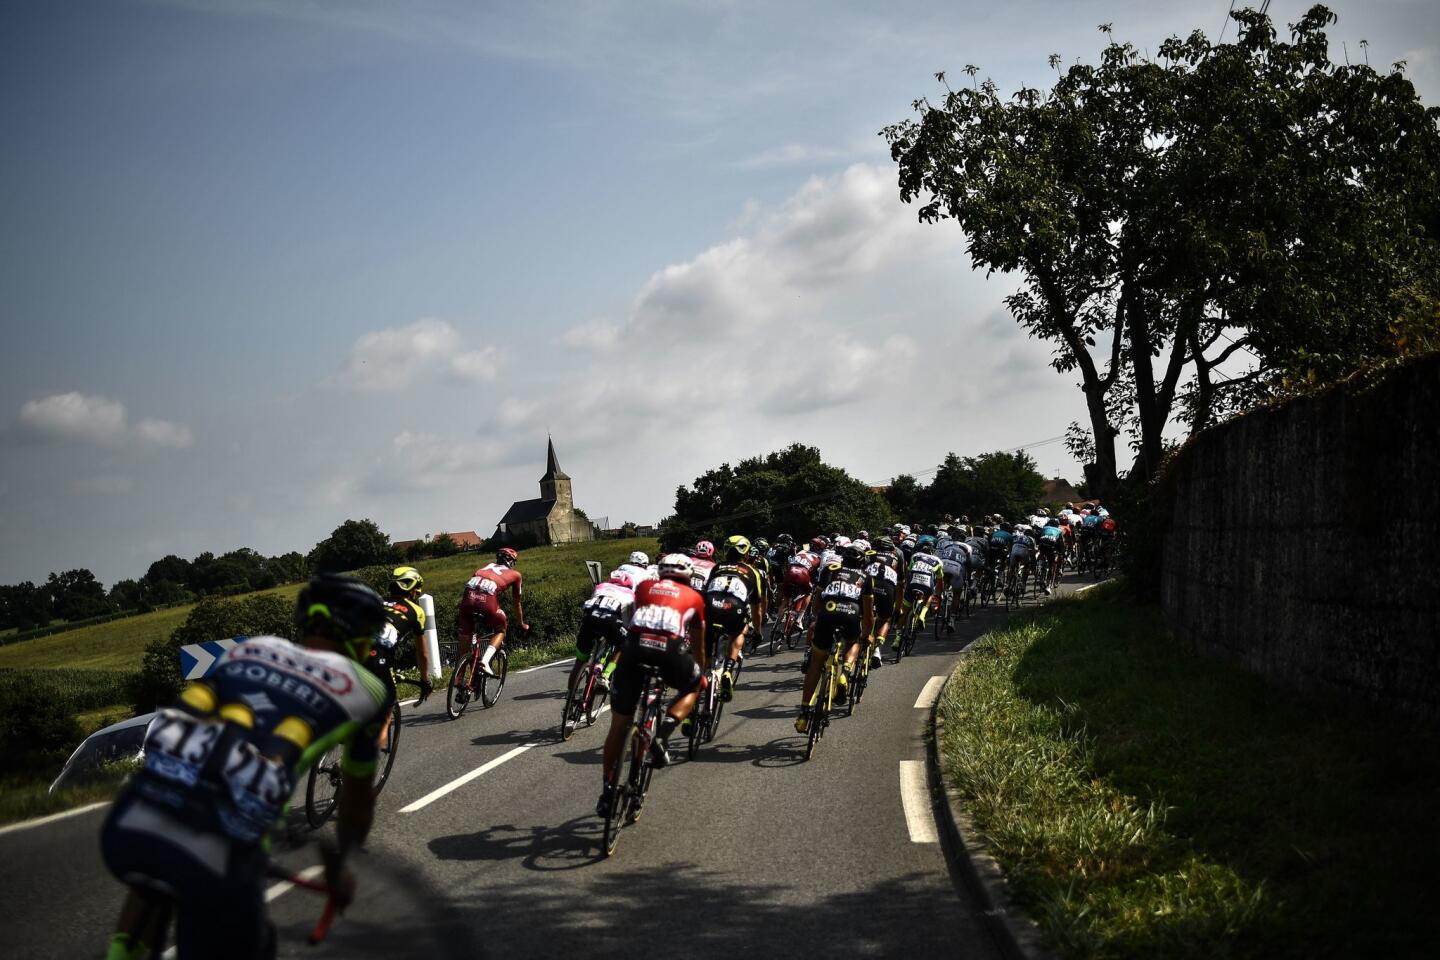 The pack rides through a bend during the 18th stage of the 105th edition of the Tour de France cycling race on July 26, 2018 between Trie-sur-Baise and Pau in southwestern France.